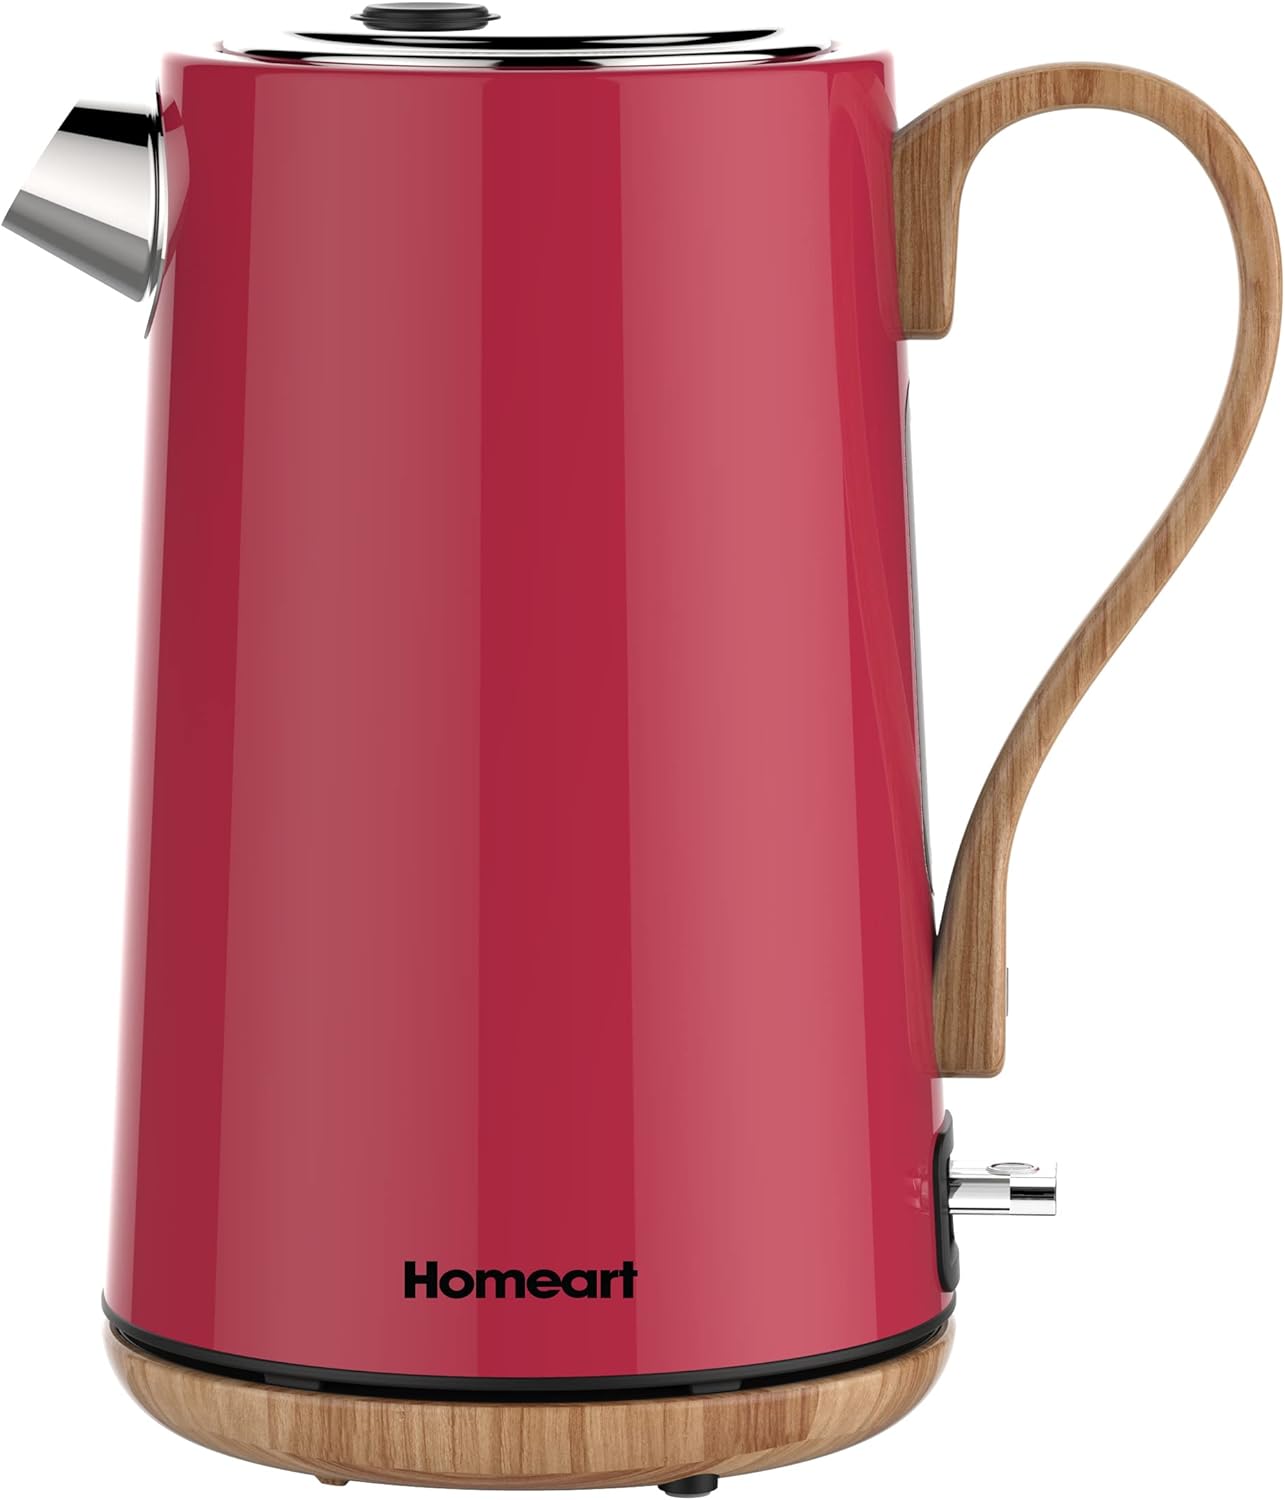 Homeart Panda Cordless Electric Kettle with Wood Detail, 1.7L Capacity